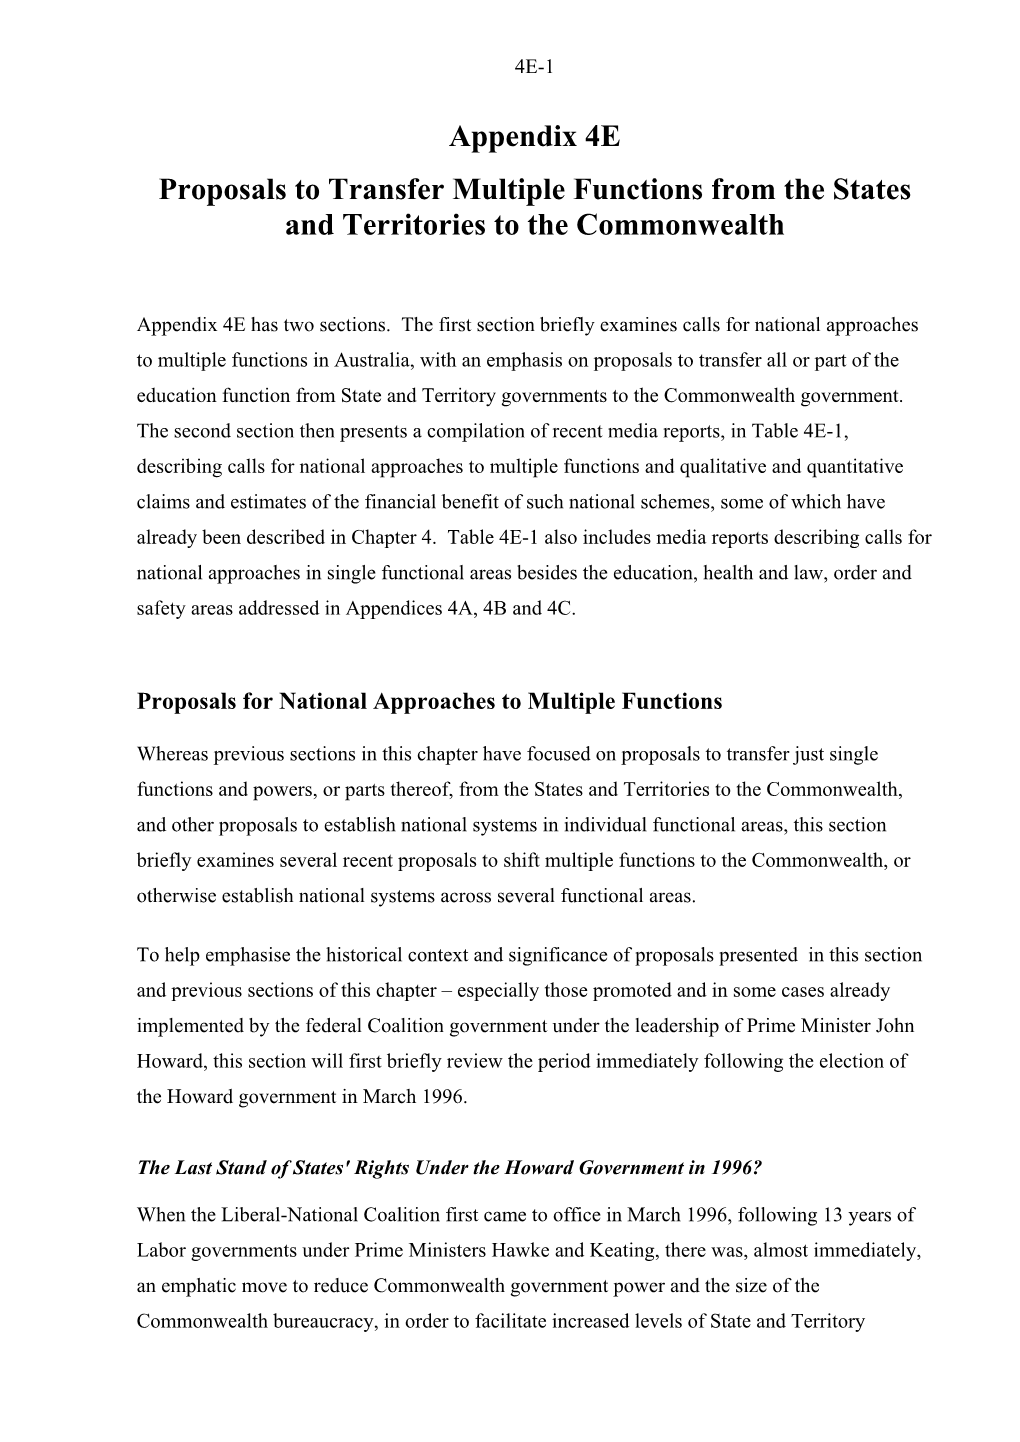 Appendix 4E Proposals to Transfer Multiple Functions from the States and Territories to the Commonwealth